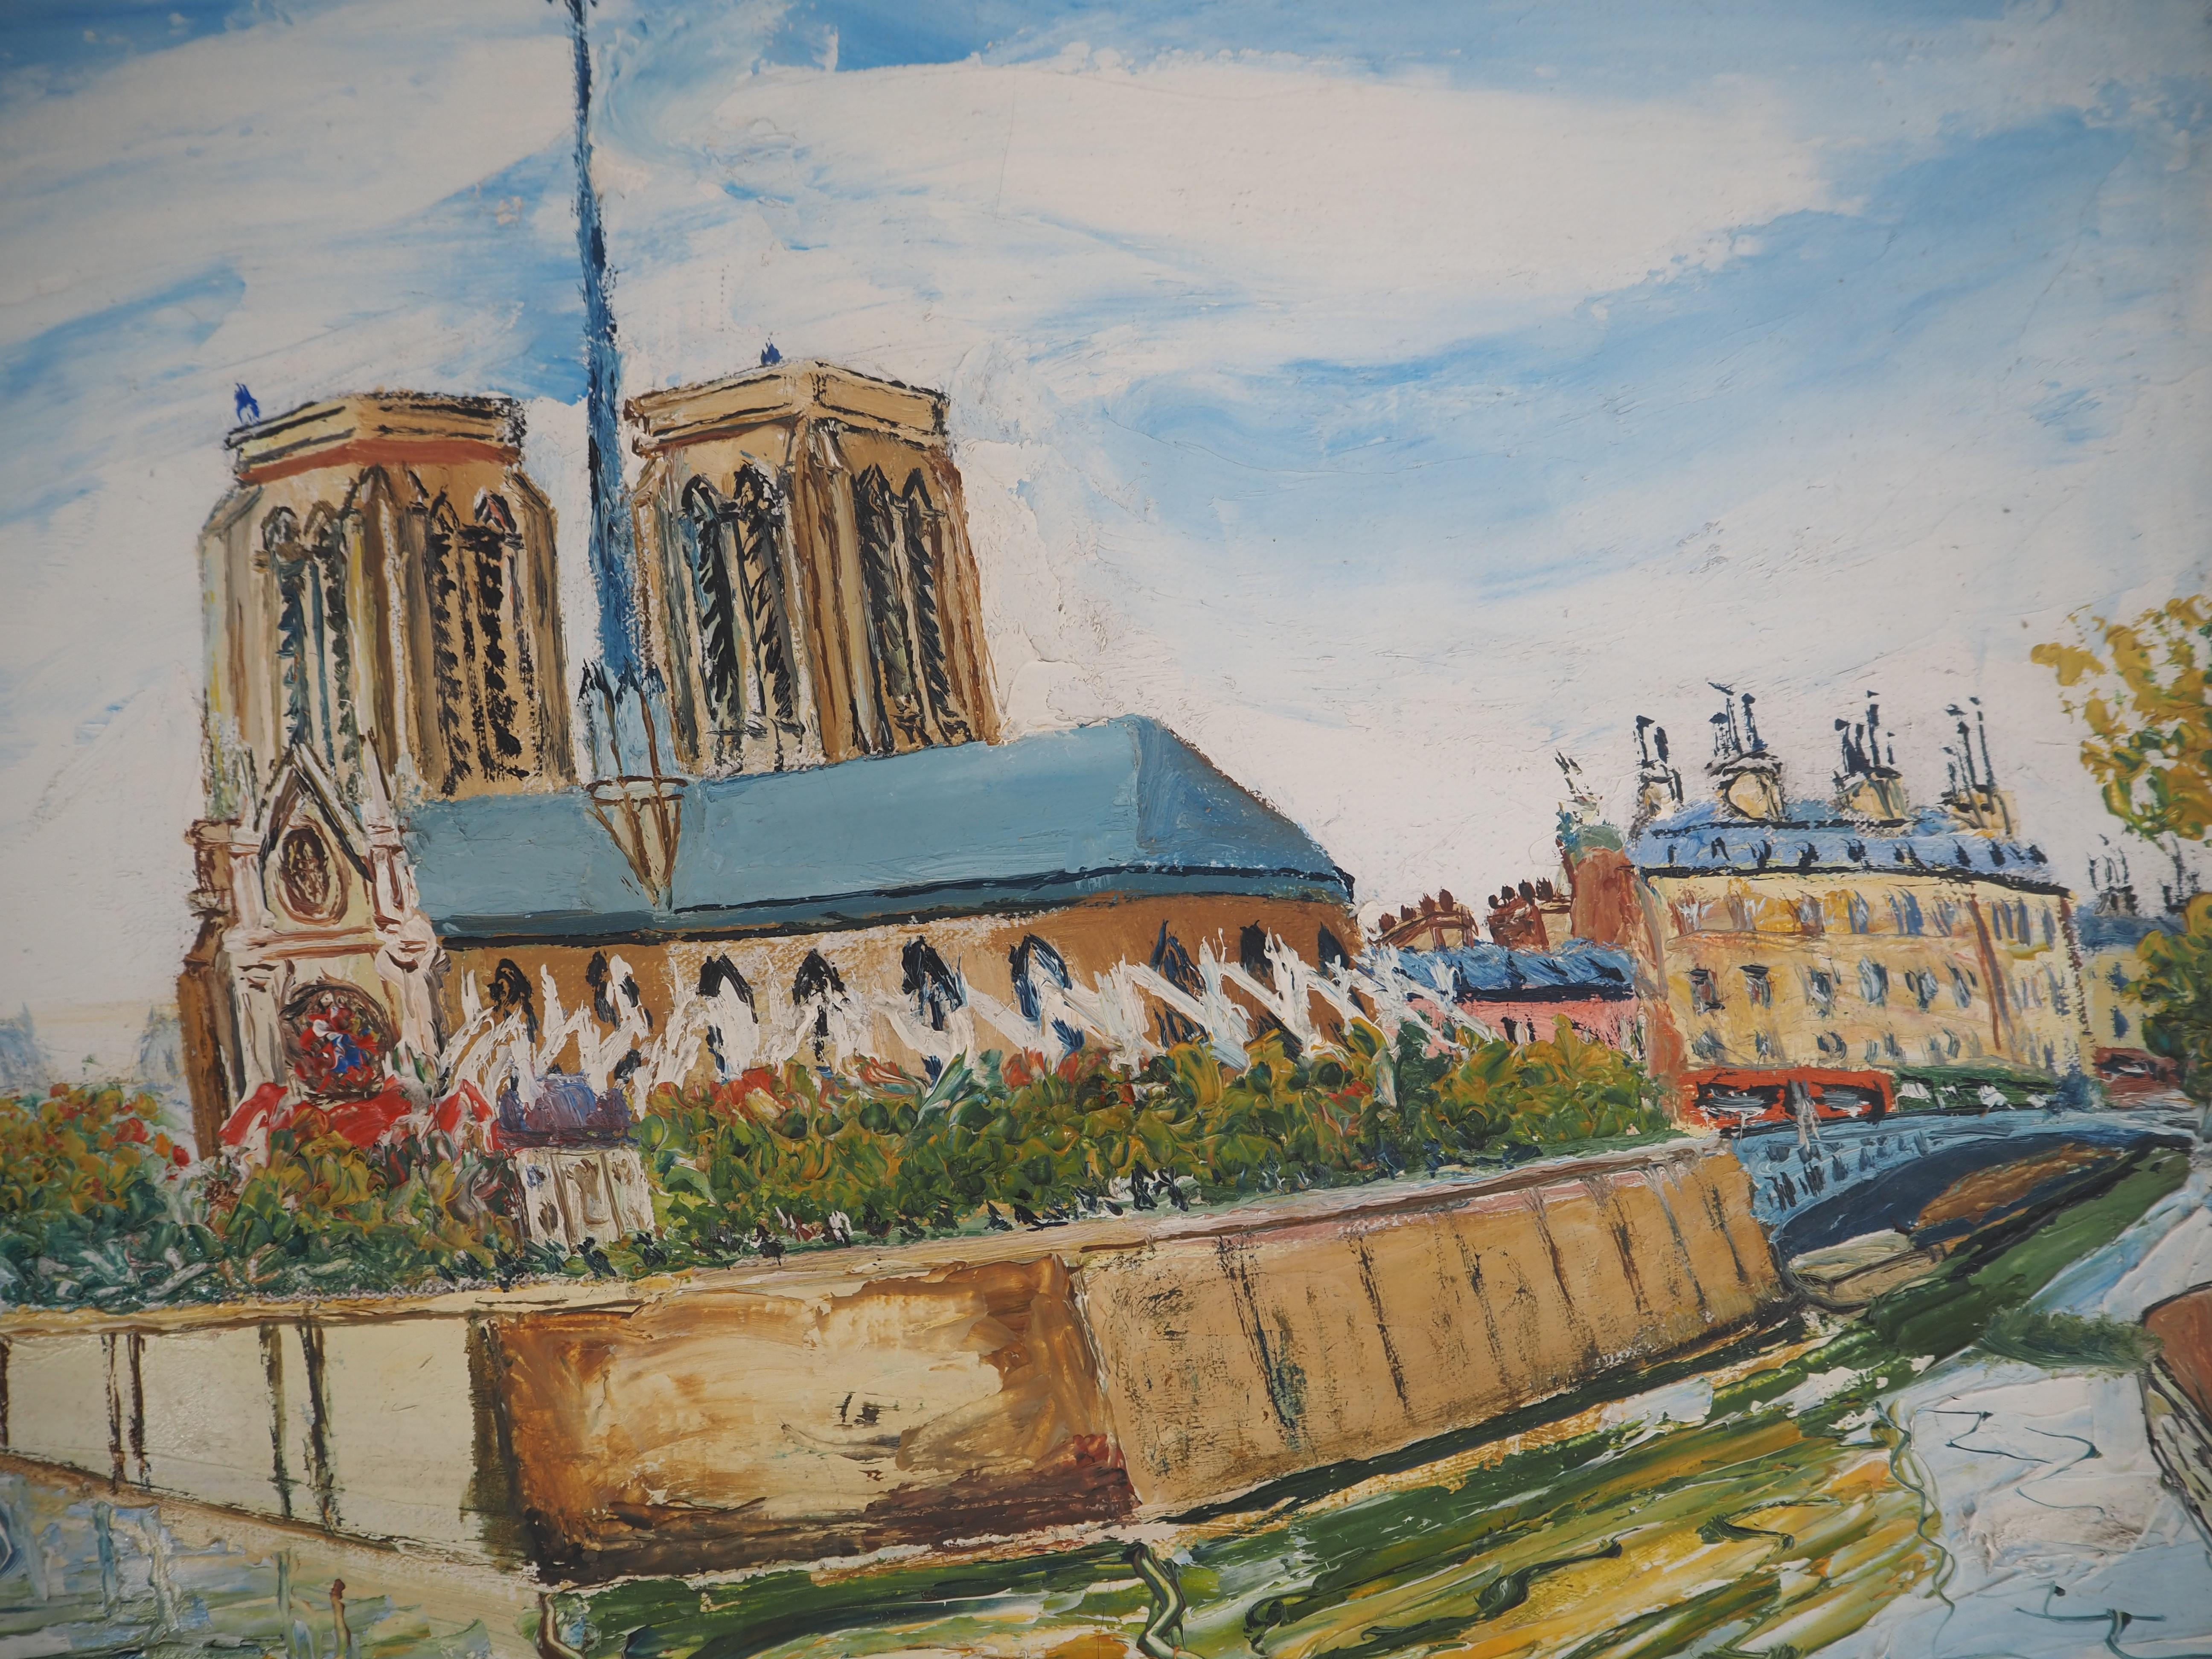 Elisée MACLET (1881-1962)
Summer in Paris : Notre Dame Church and Seine River

Original oil on canvas
Signed bottom right
On canvas 46 x 66 cm (c. 18 x 22 in) 
Presented in a golden frame 60 x 70 cm (c. 24 x 28 in)

Very good condition, light